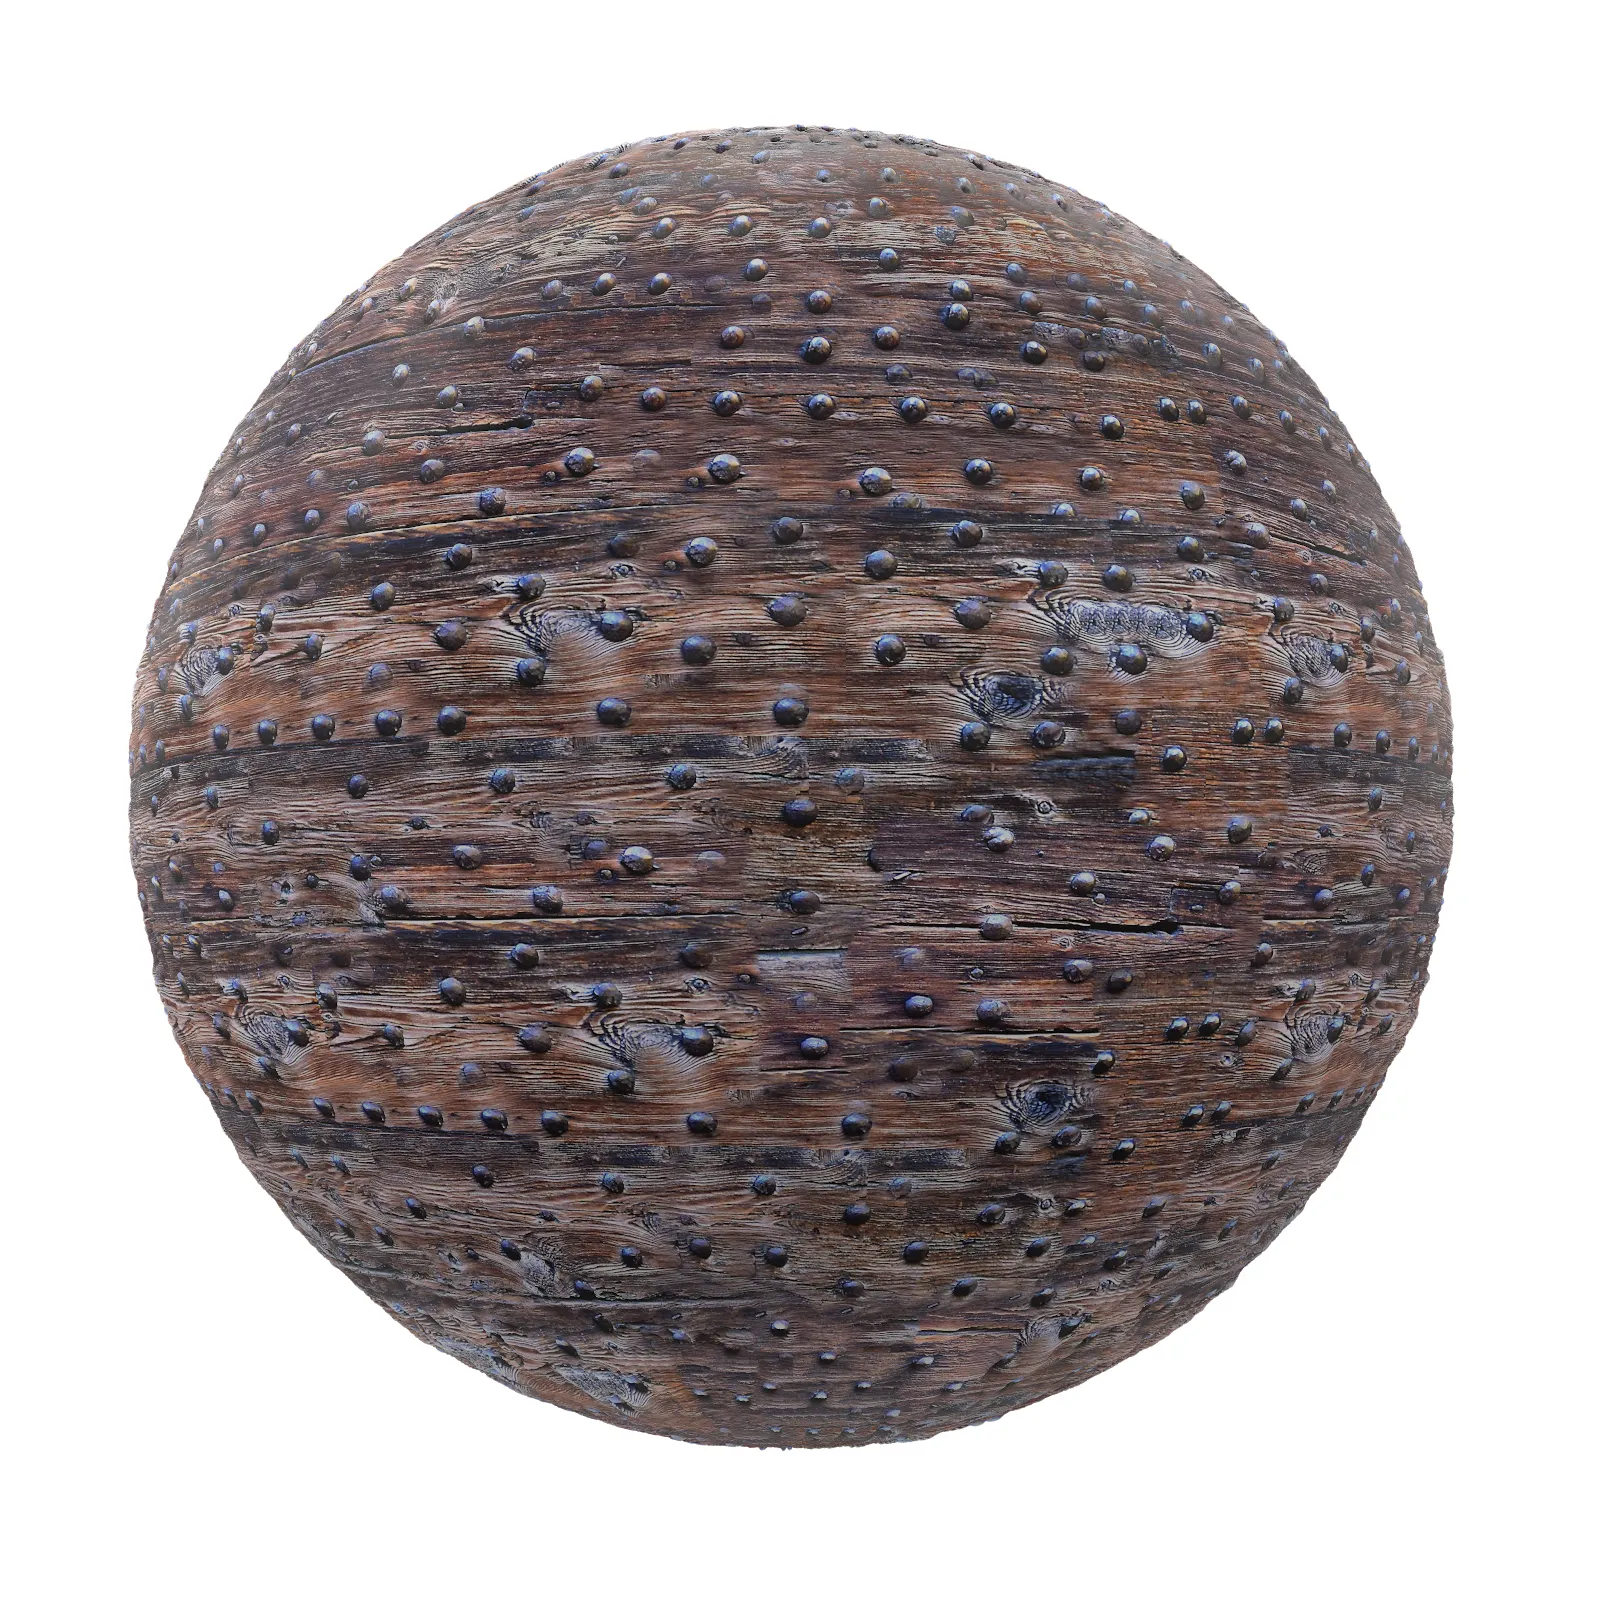 TEXTURES – WOOD – Old Studded Wood